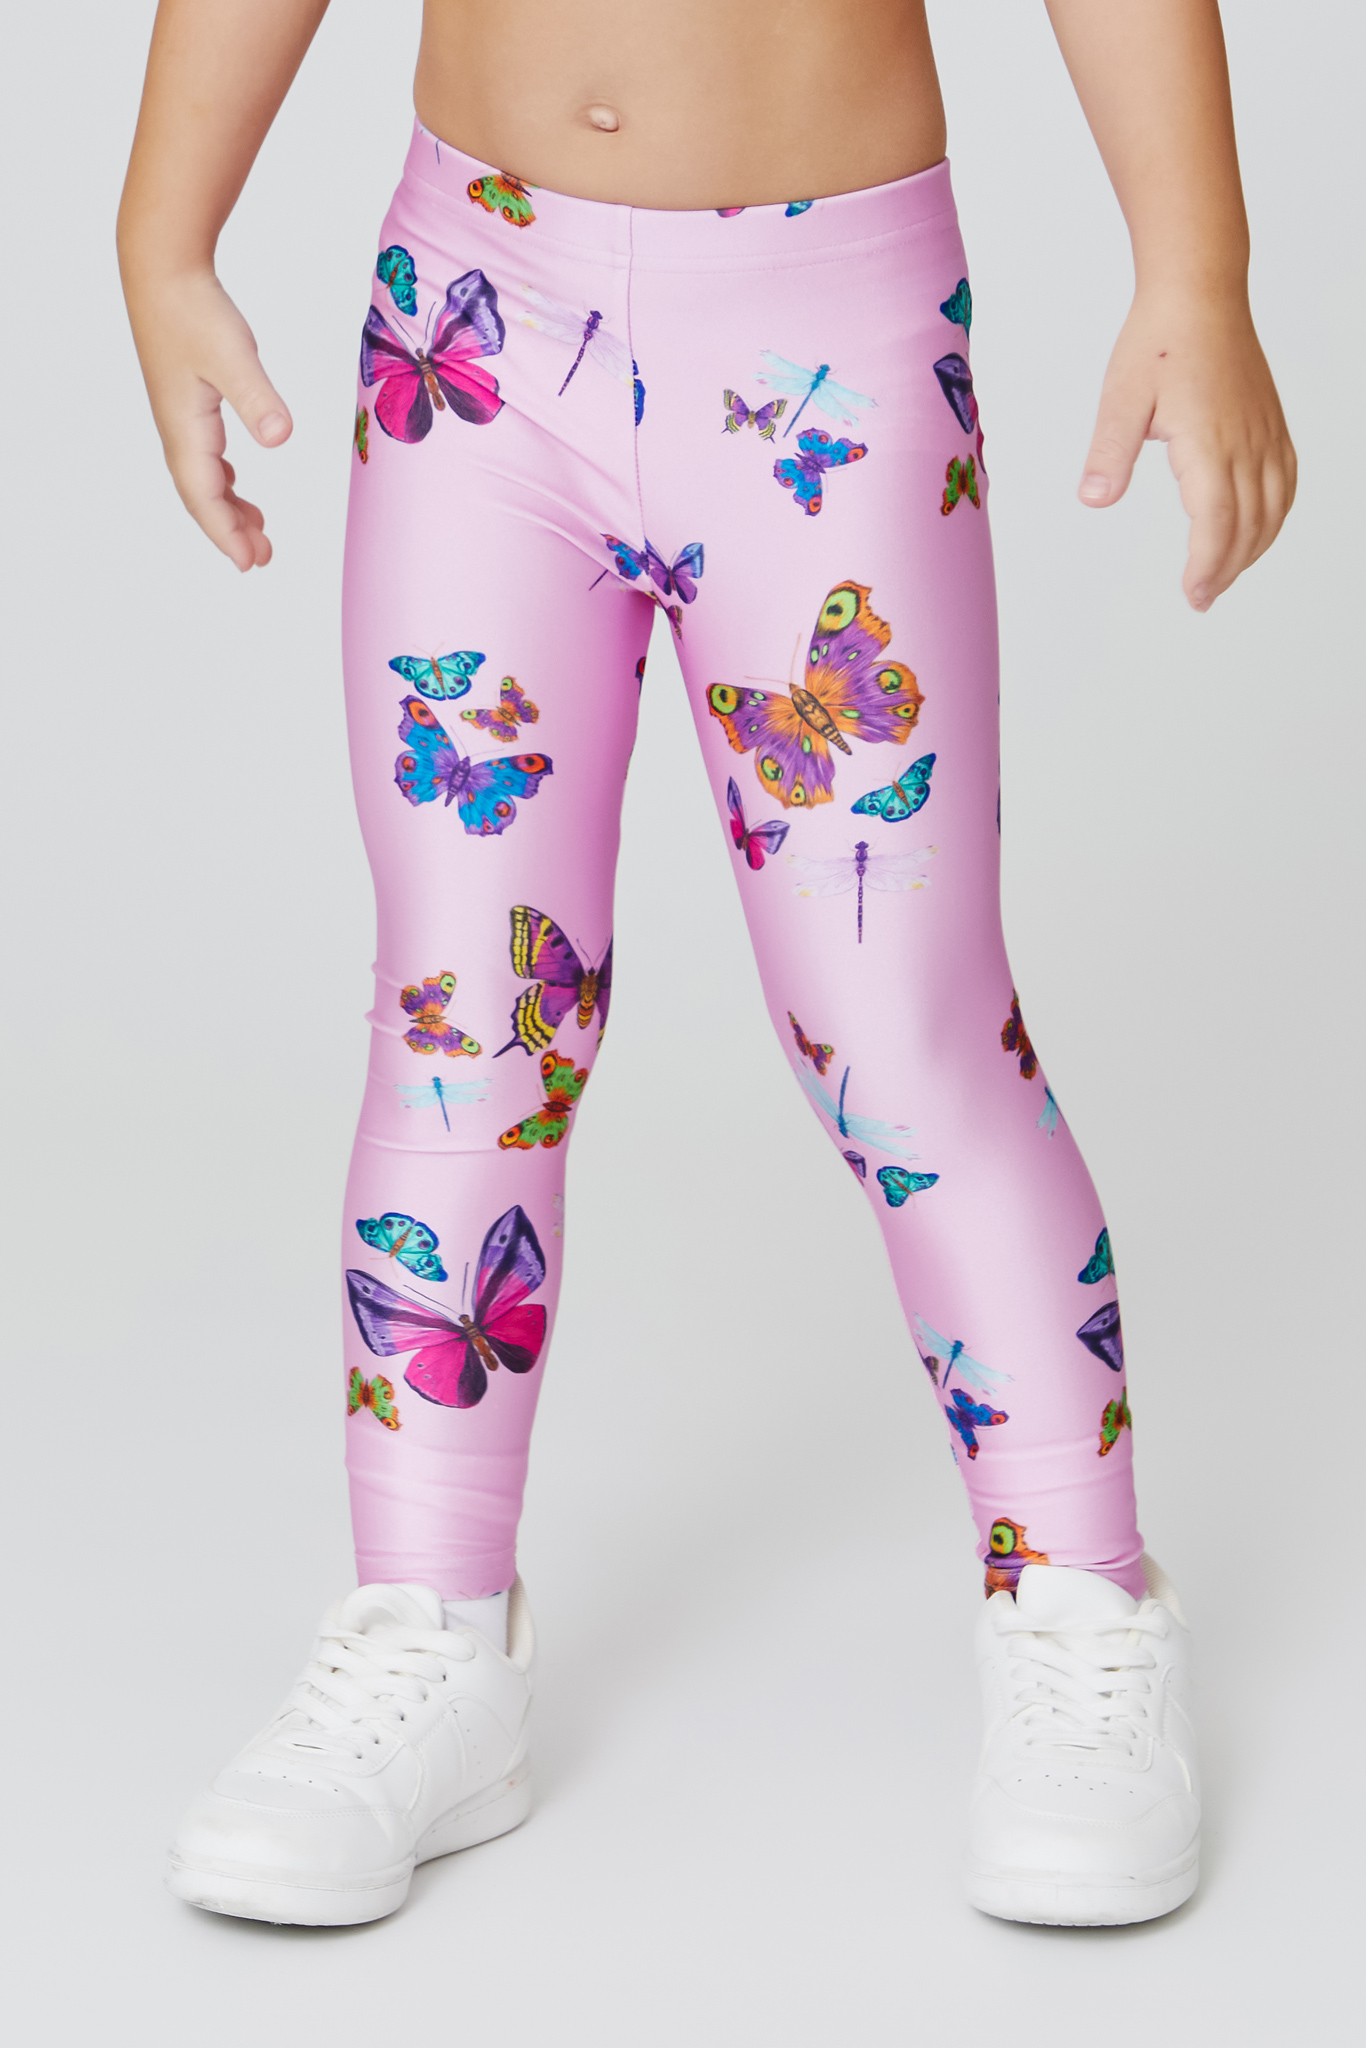 Smarty Girl Robot Kids' Leggings 1-10Y | Explore Science in Style – Smarty  Girl & Co.